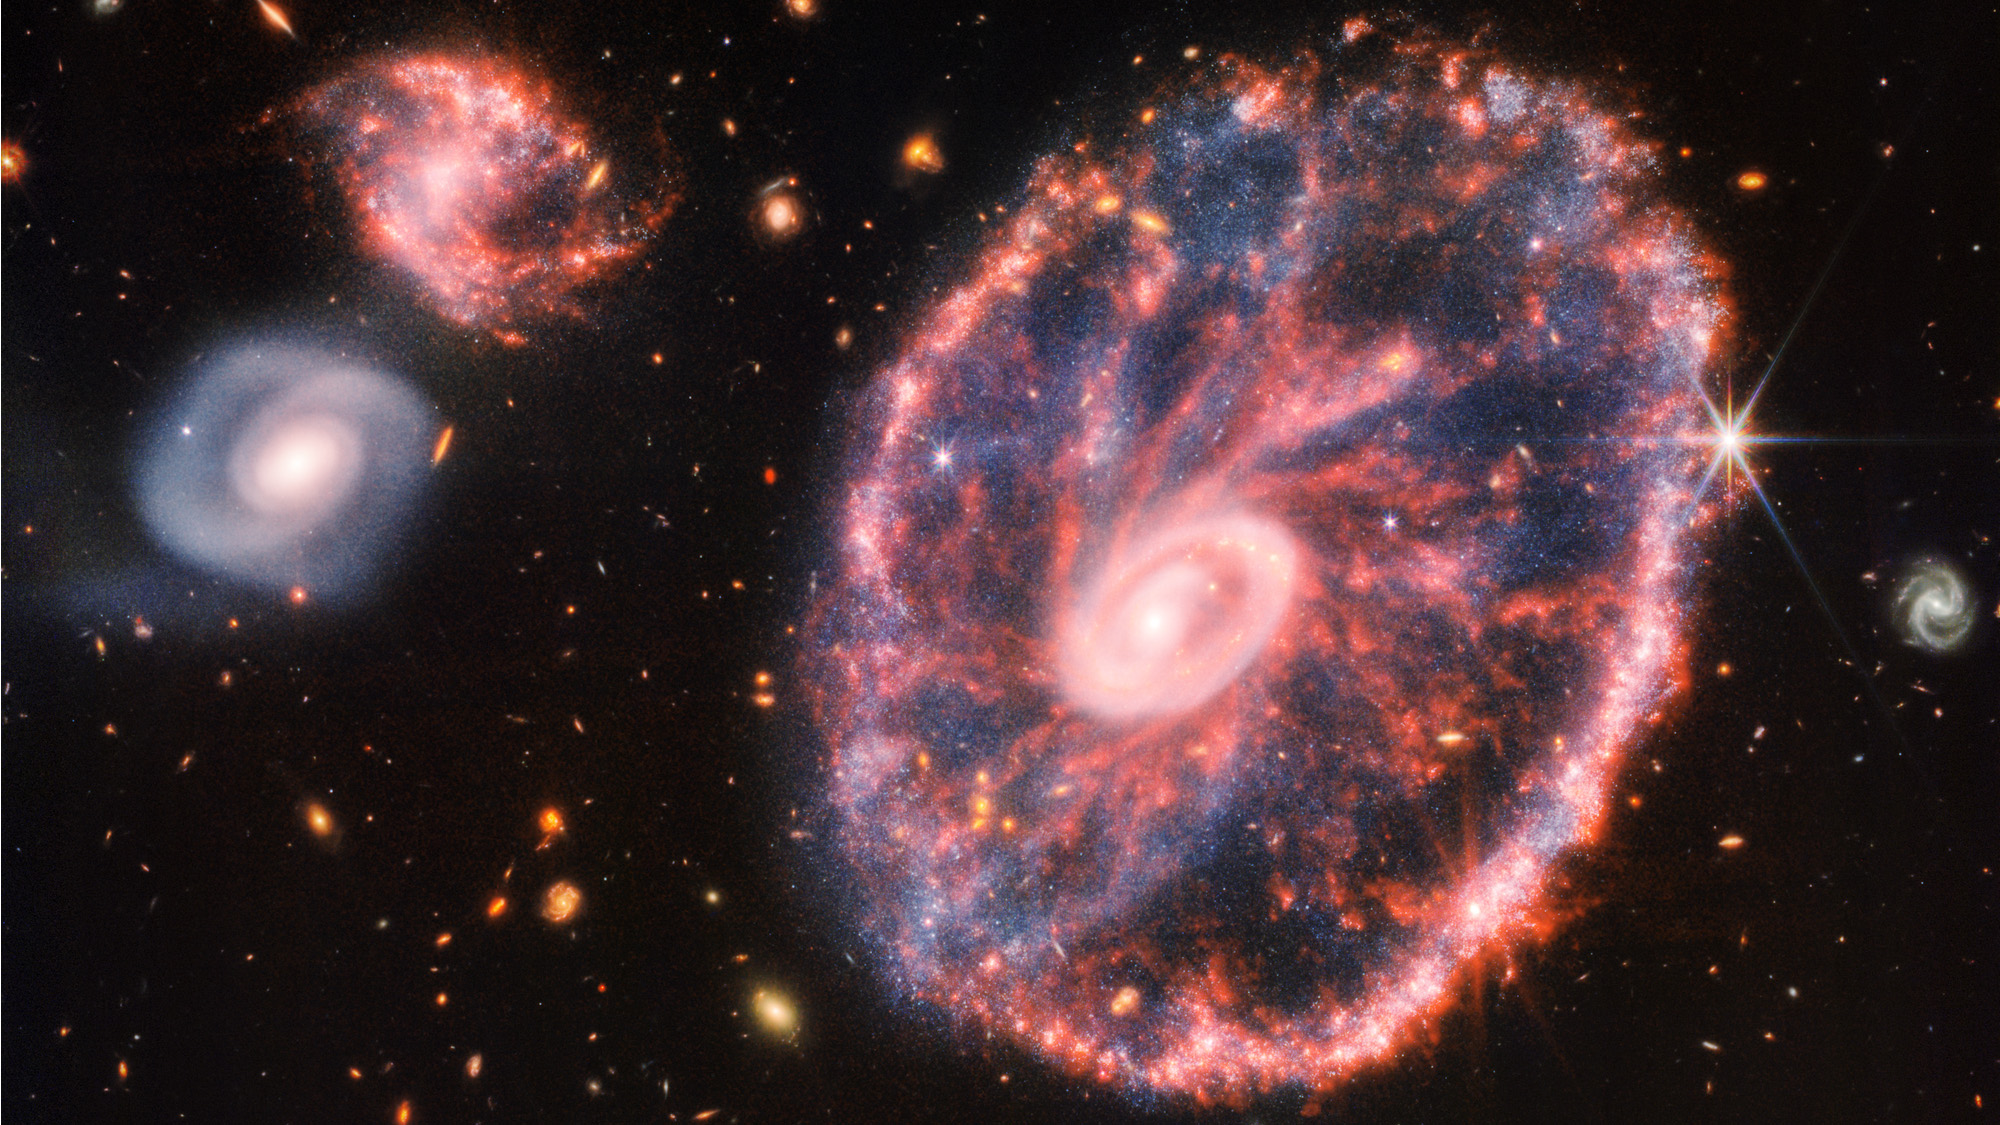 Daily News | Online News A composite image captured by the James Webb Space Telescope's MIRI and NIRCam instruments reveals the odd Cartwheel galaxy in an unprecedented detail.